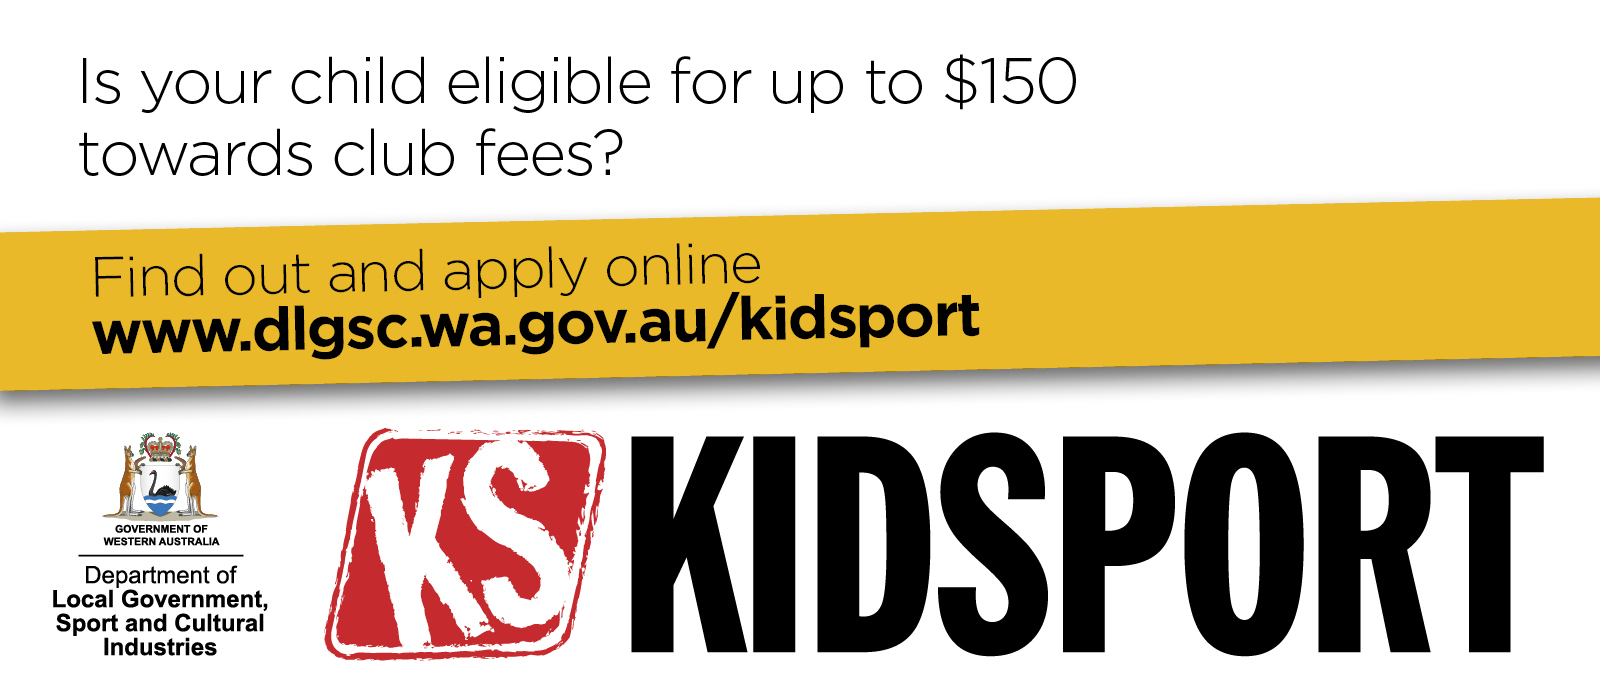 KidSport website images your child eligible words only